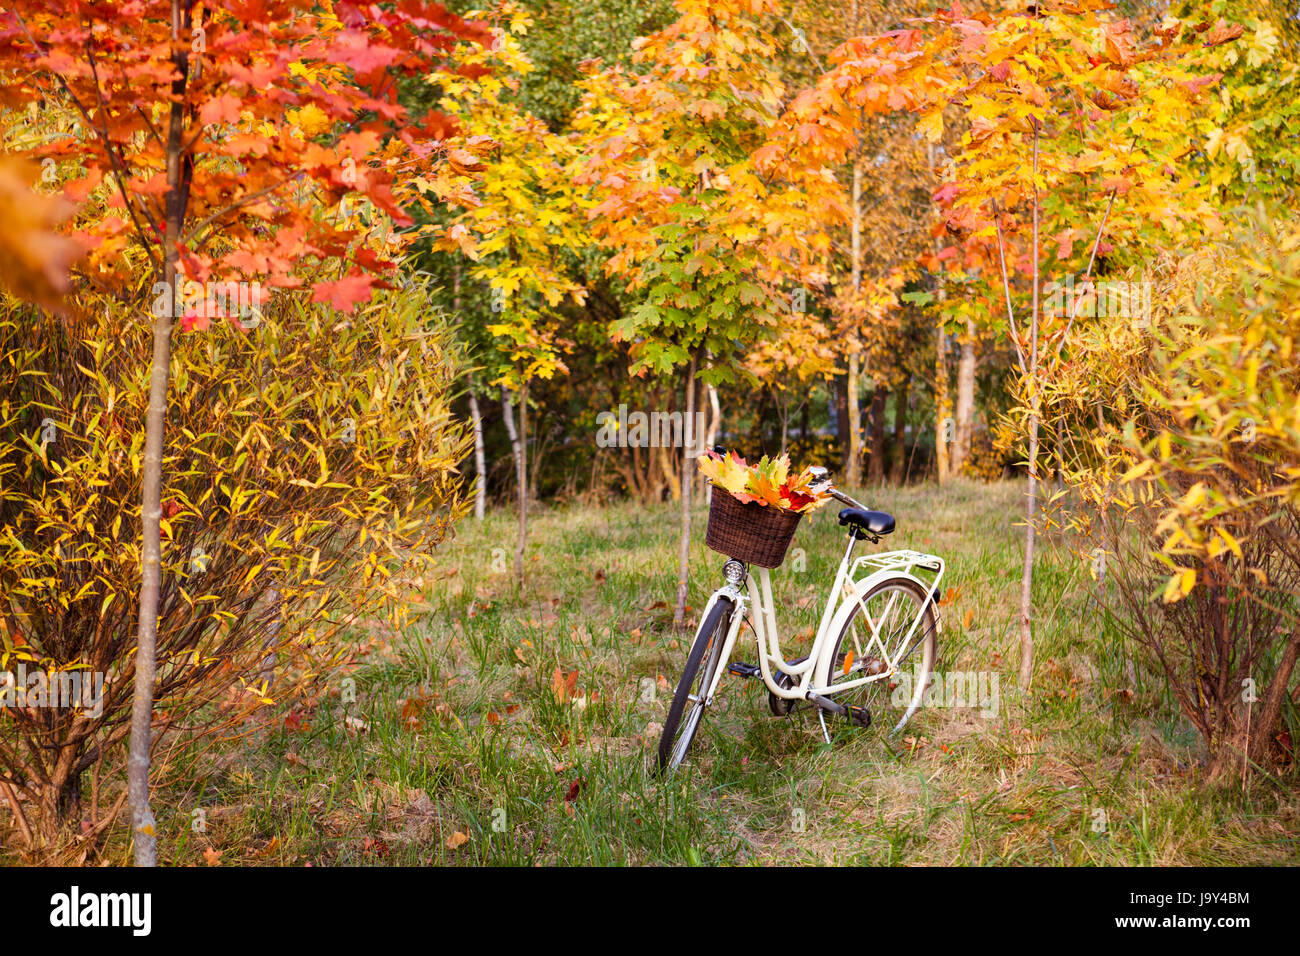 White retro style bicycle with basket with orange, yellow and green leaves, parked in the colorful fall park among trees Stock Photo